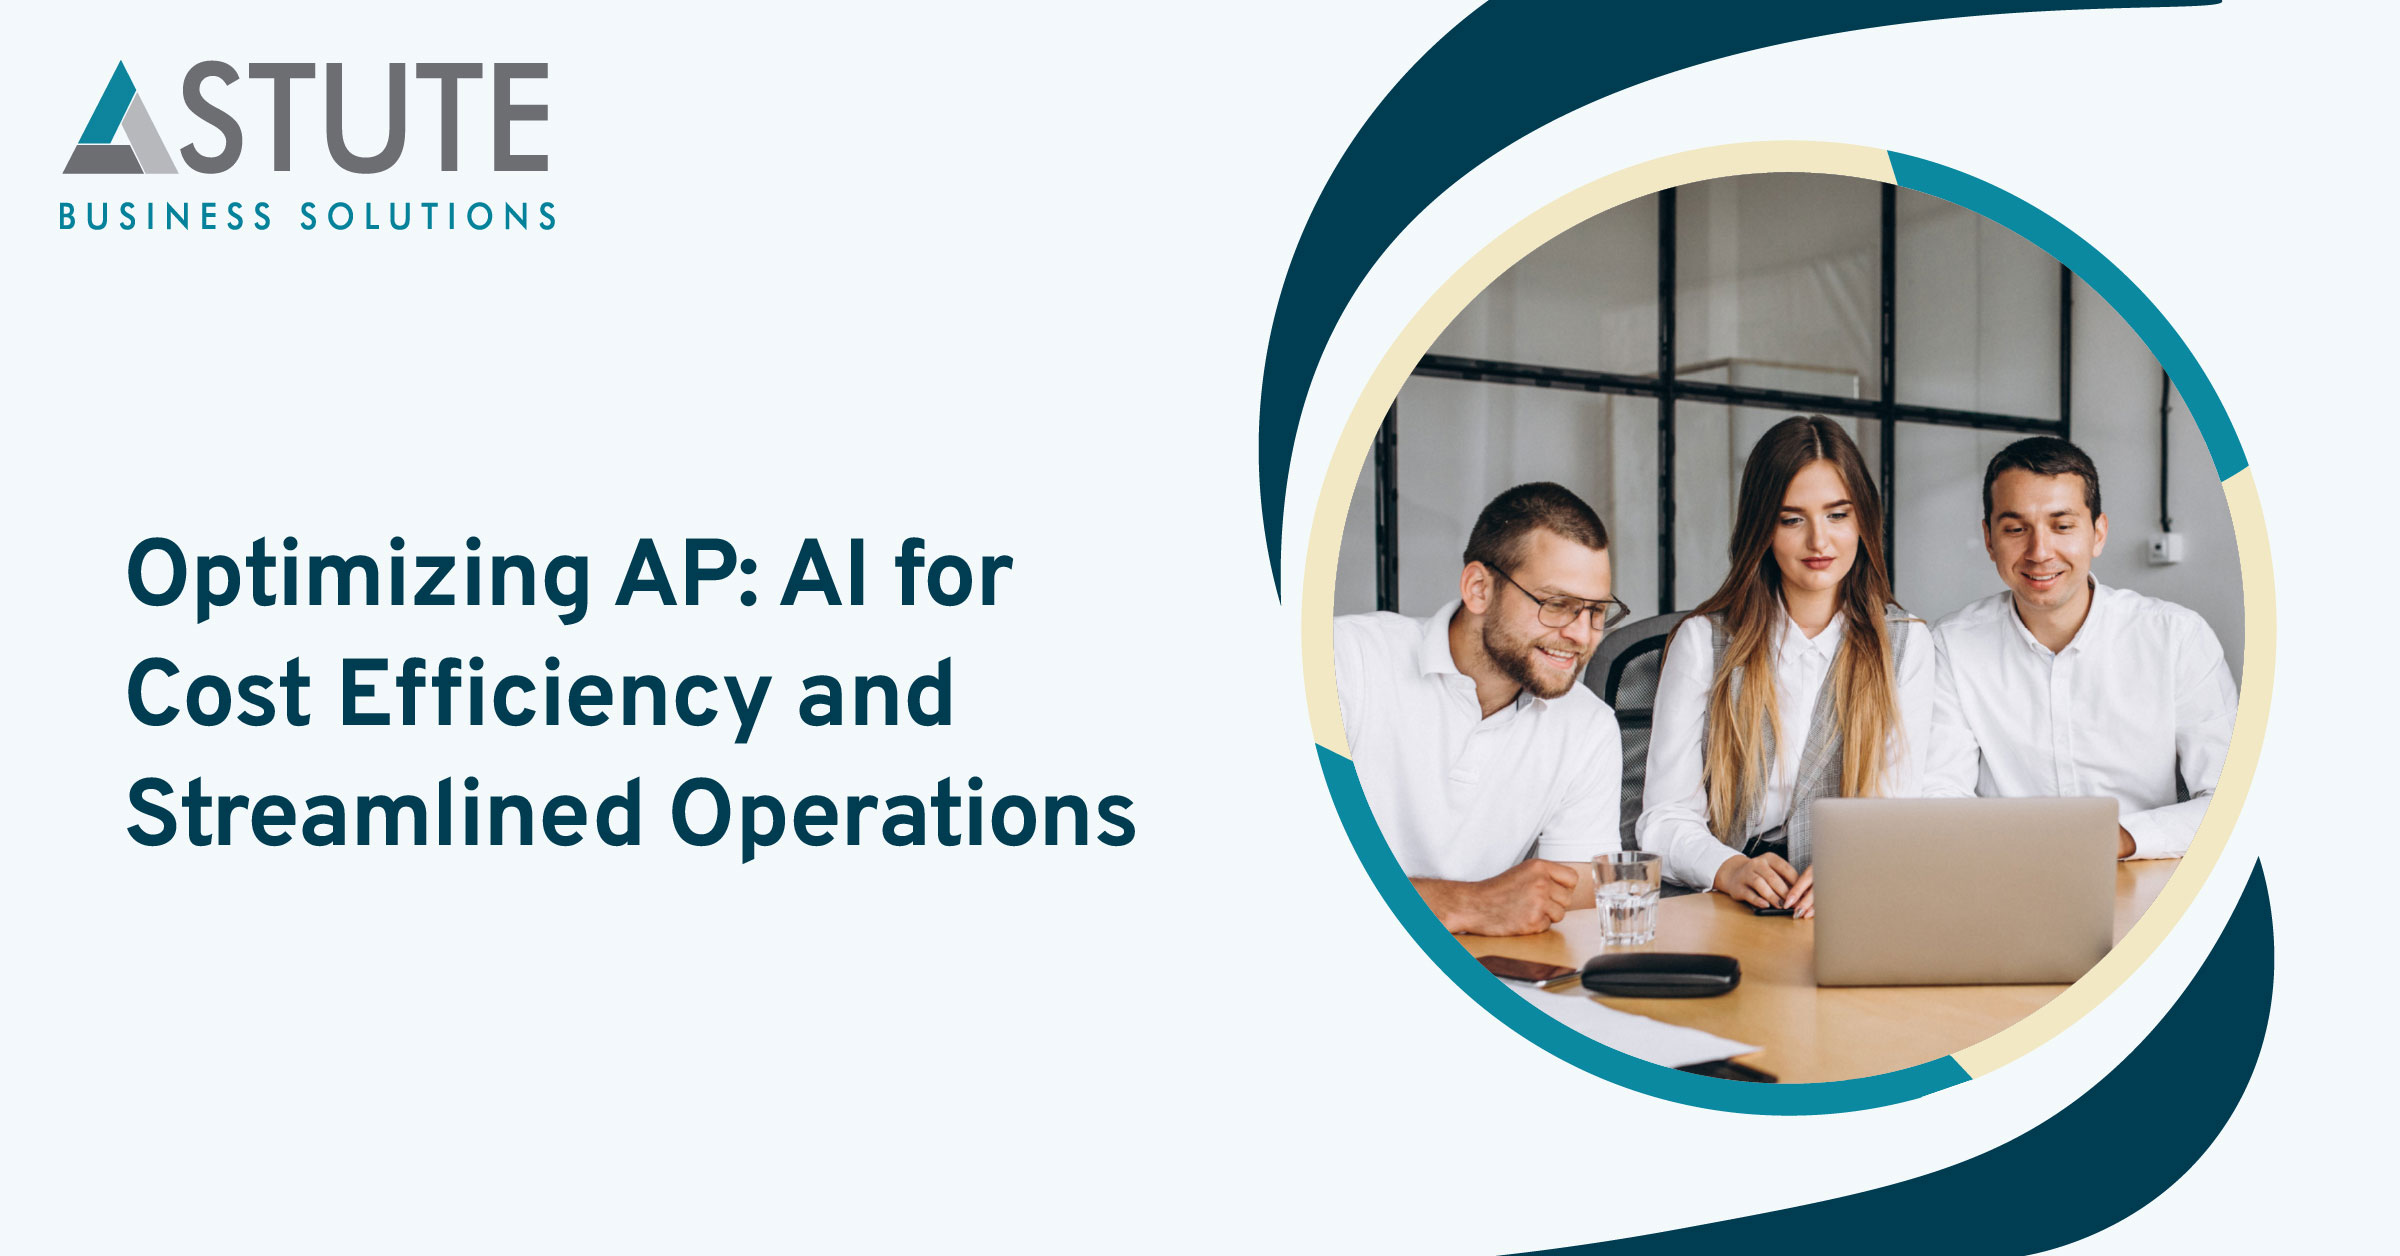 AI for Cost Efficiency and Streamlined Operations